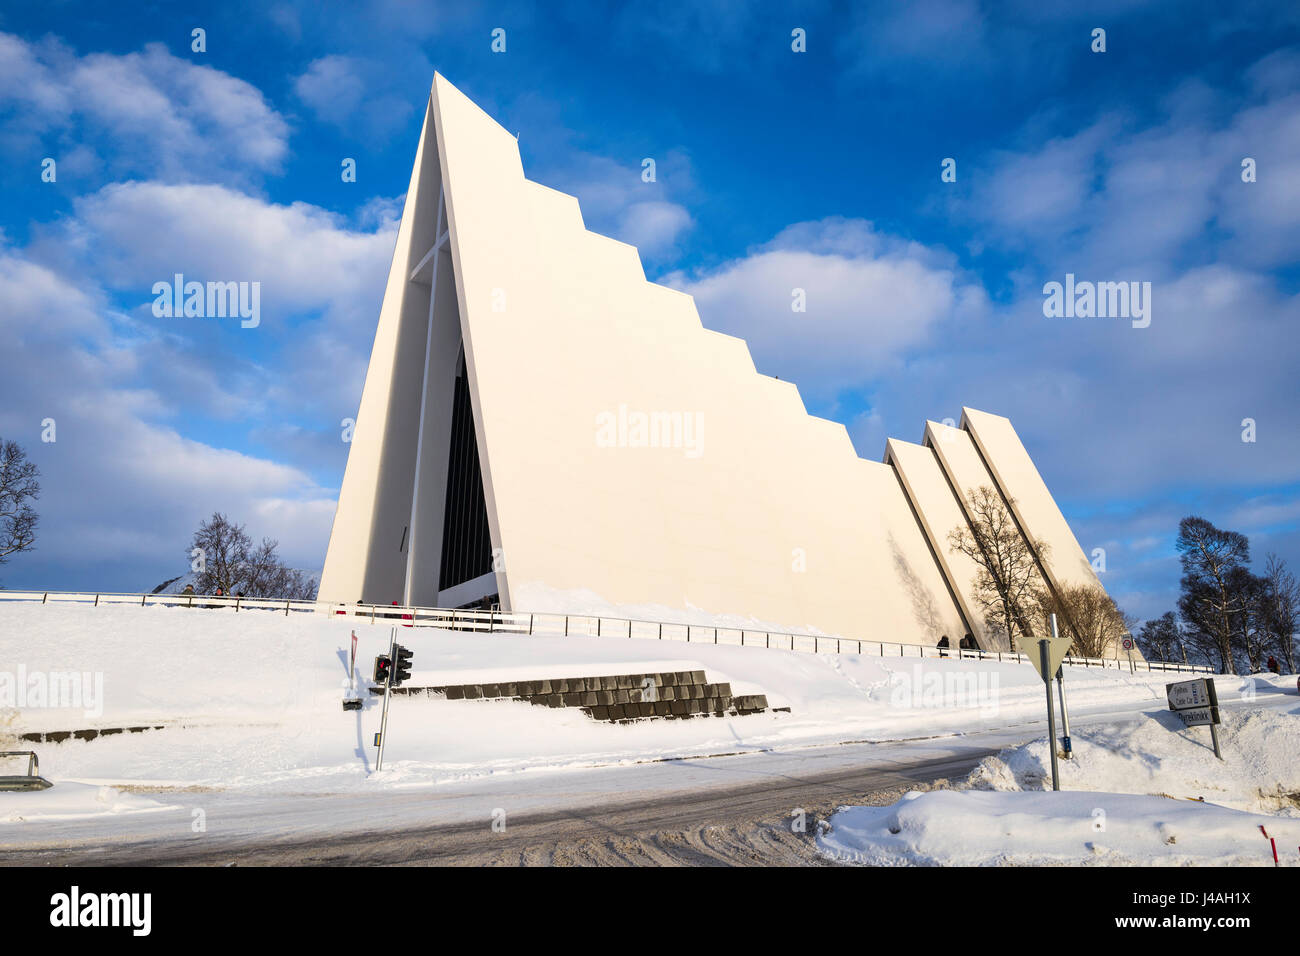 The 'Arctic Cathedral' or Tromsdalen church, a landmark of Tromsø, northern Norway, was completed in 1965. Stock Photo